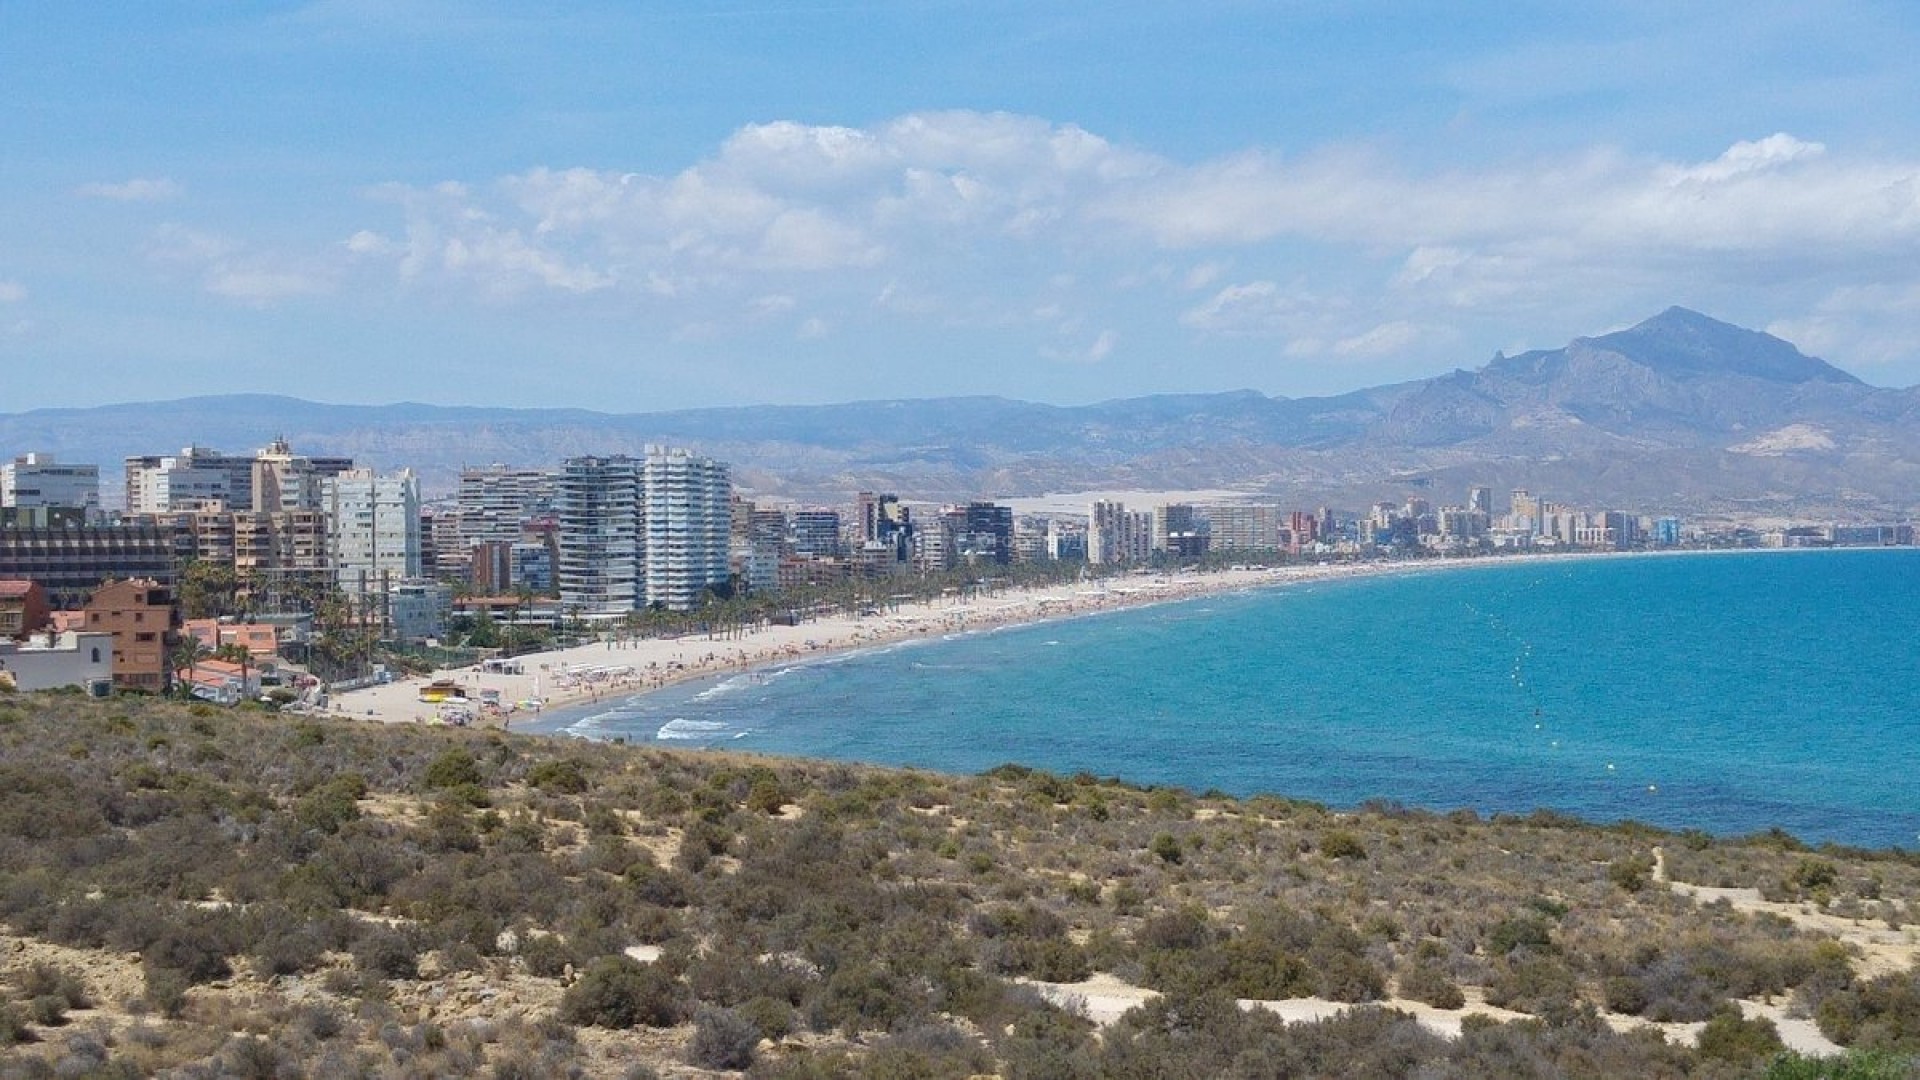 Buying flat in San Juan Alicante? Exclusive apartments with 1/2/3/4 bedrooms, 2 bathrooms. Fantastic common areas with swimming pool, gym and social club